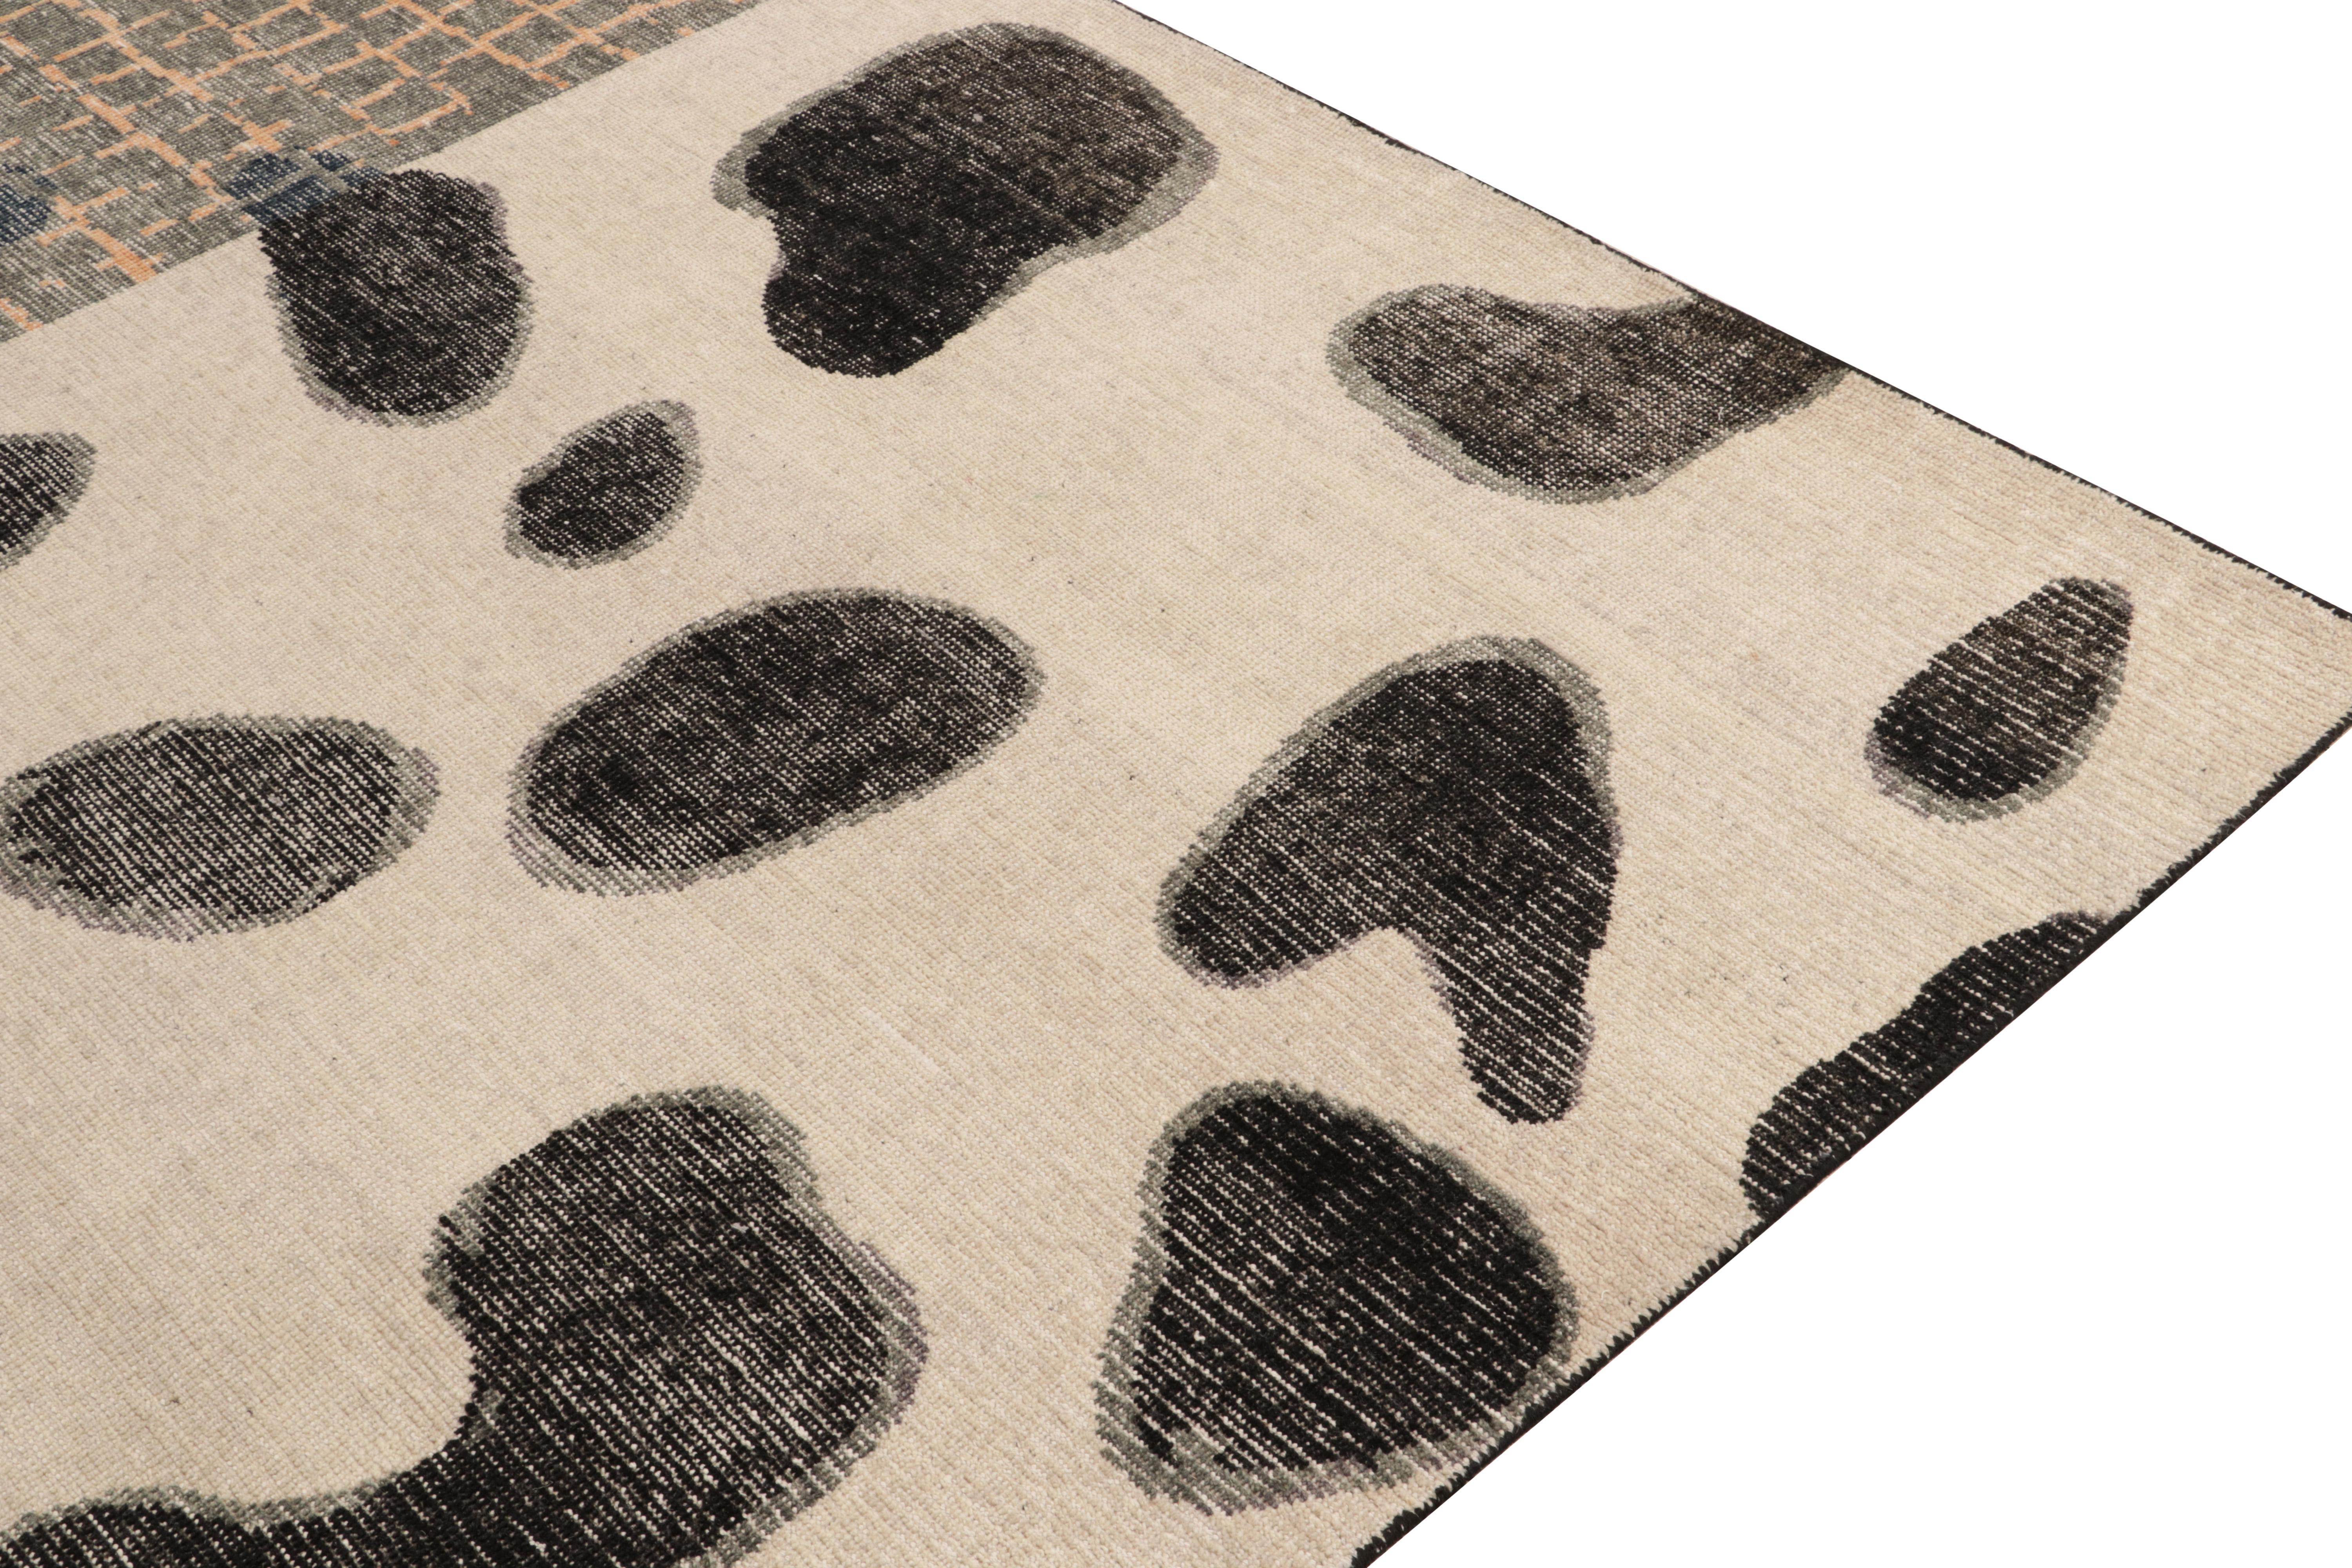 Hand-Knotted Rug & Kilim's Distressed Style Rug in Beige-Brown, Black Abstract Pattern For Sale